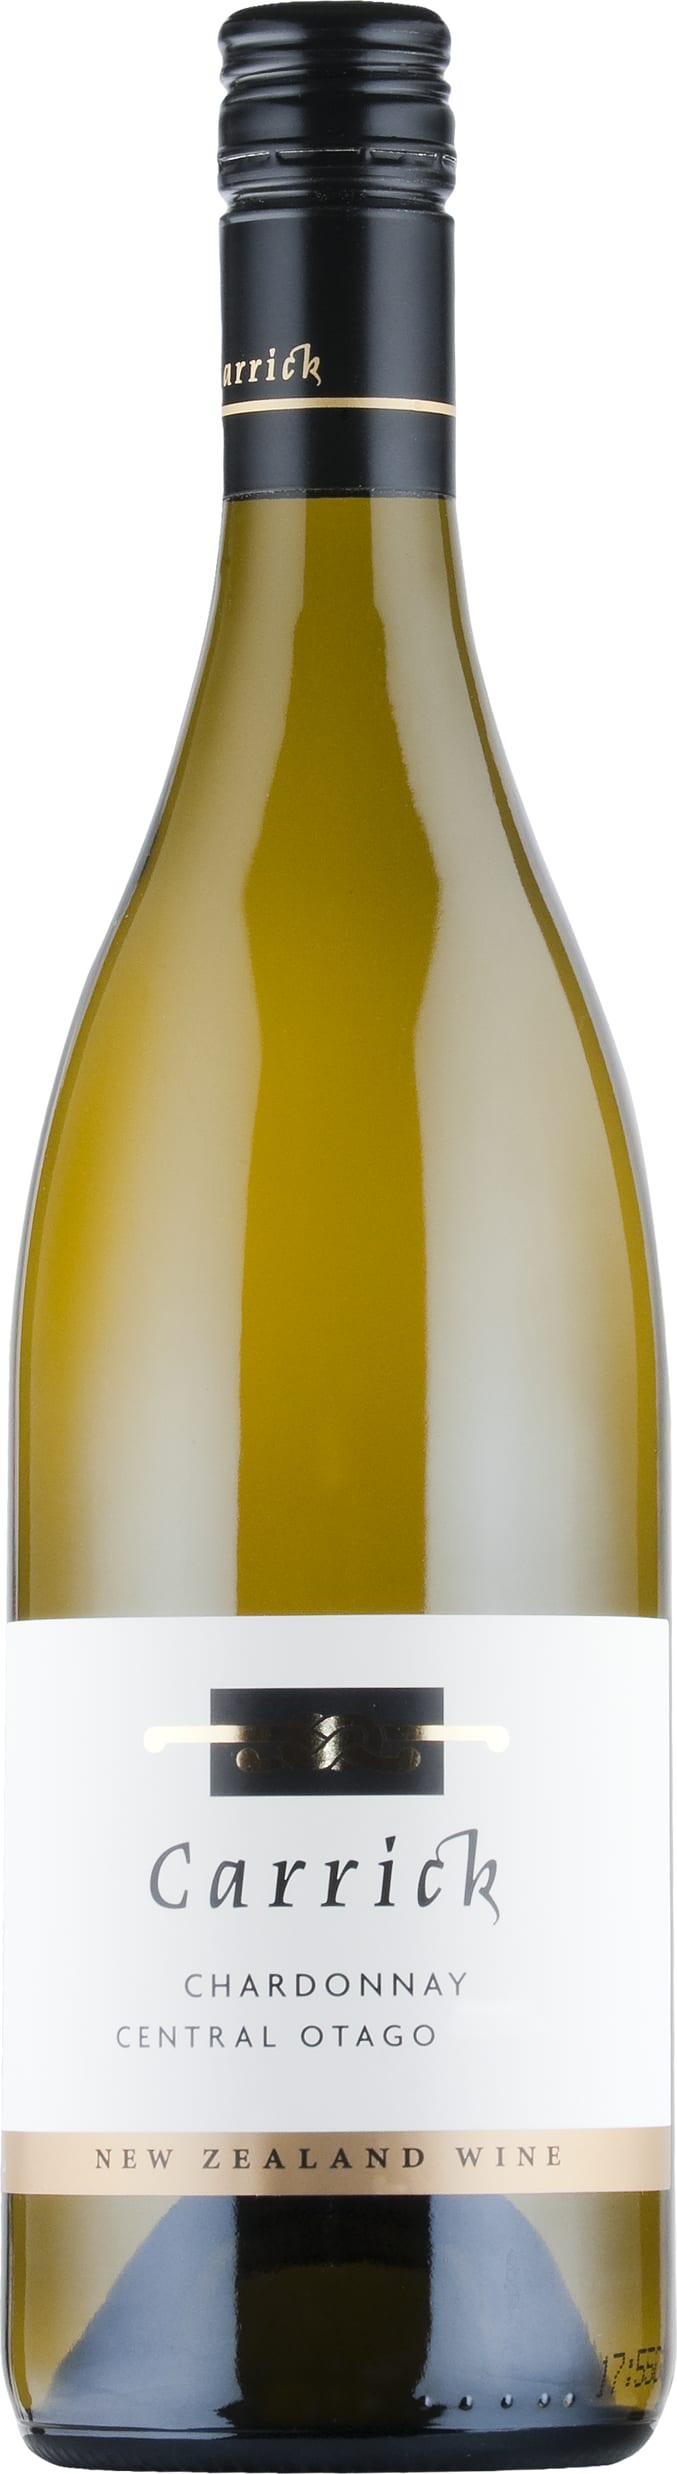 Carrick Winery Chardonnay 2018 75cl - Buy Carrick Winery Wines from GREAT WINES DIRECT wine shop